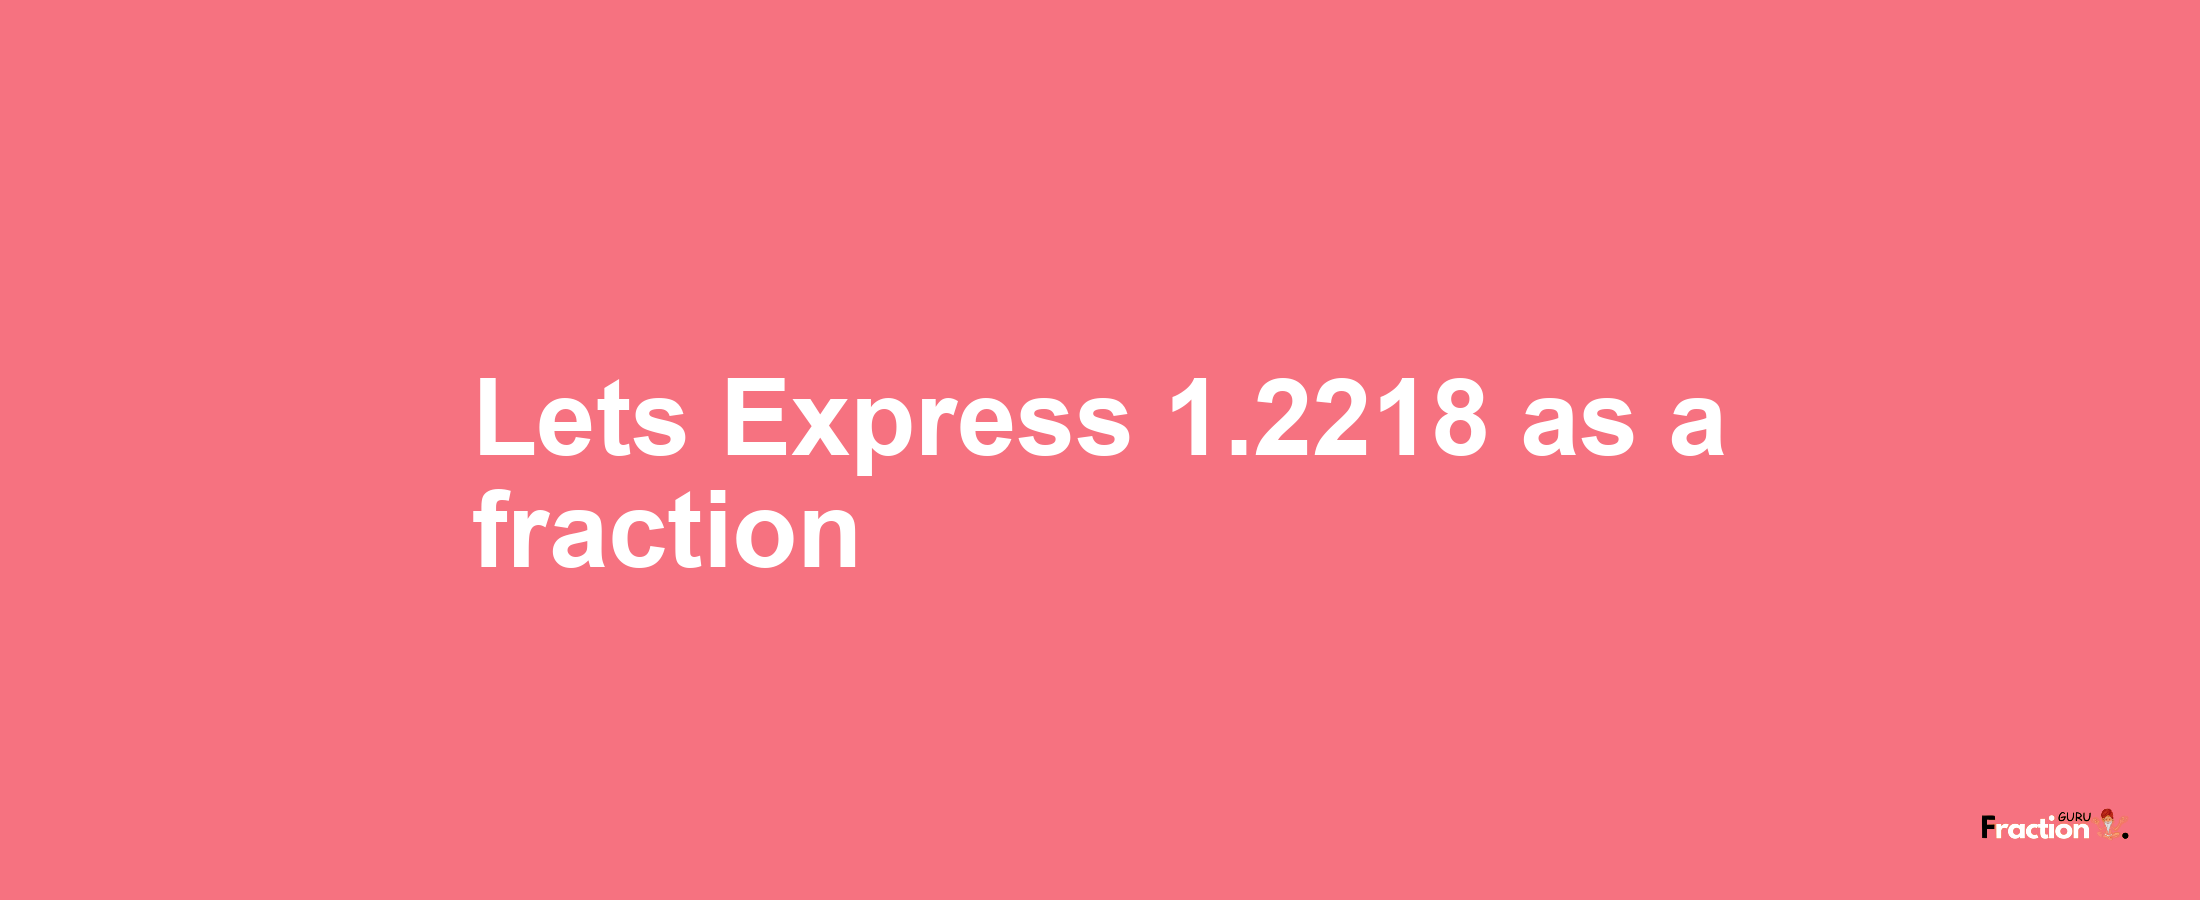 Lets Express 1.2218 as afraction